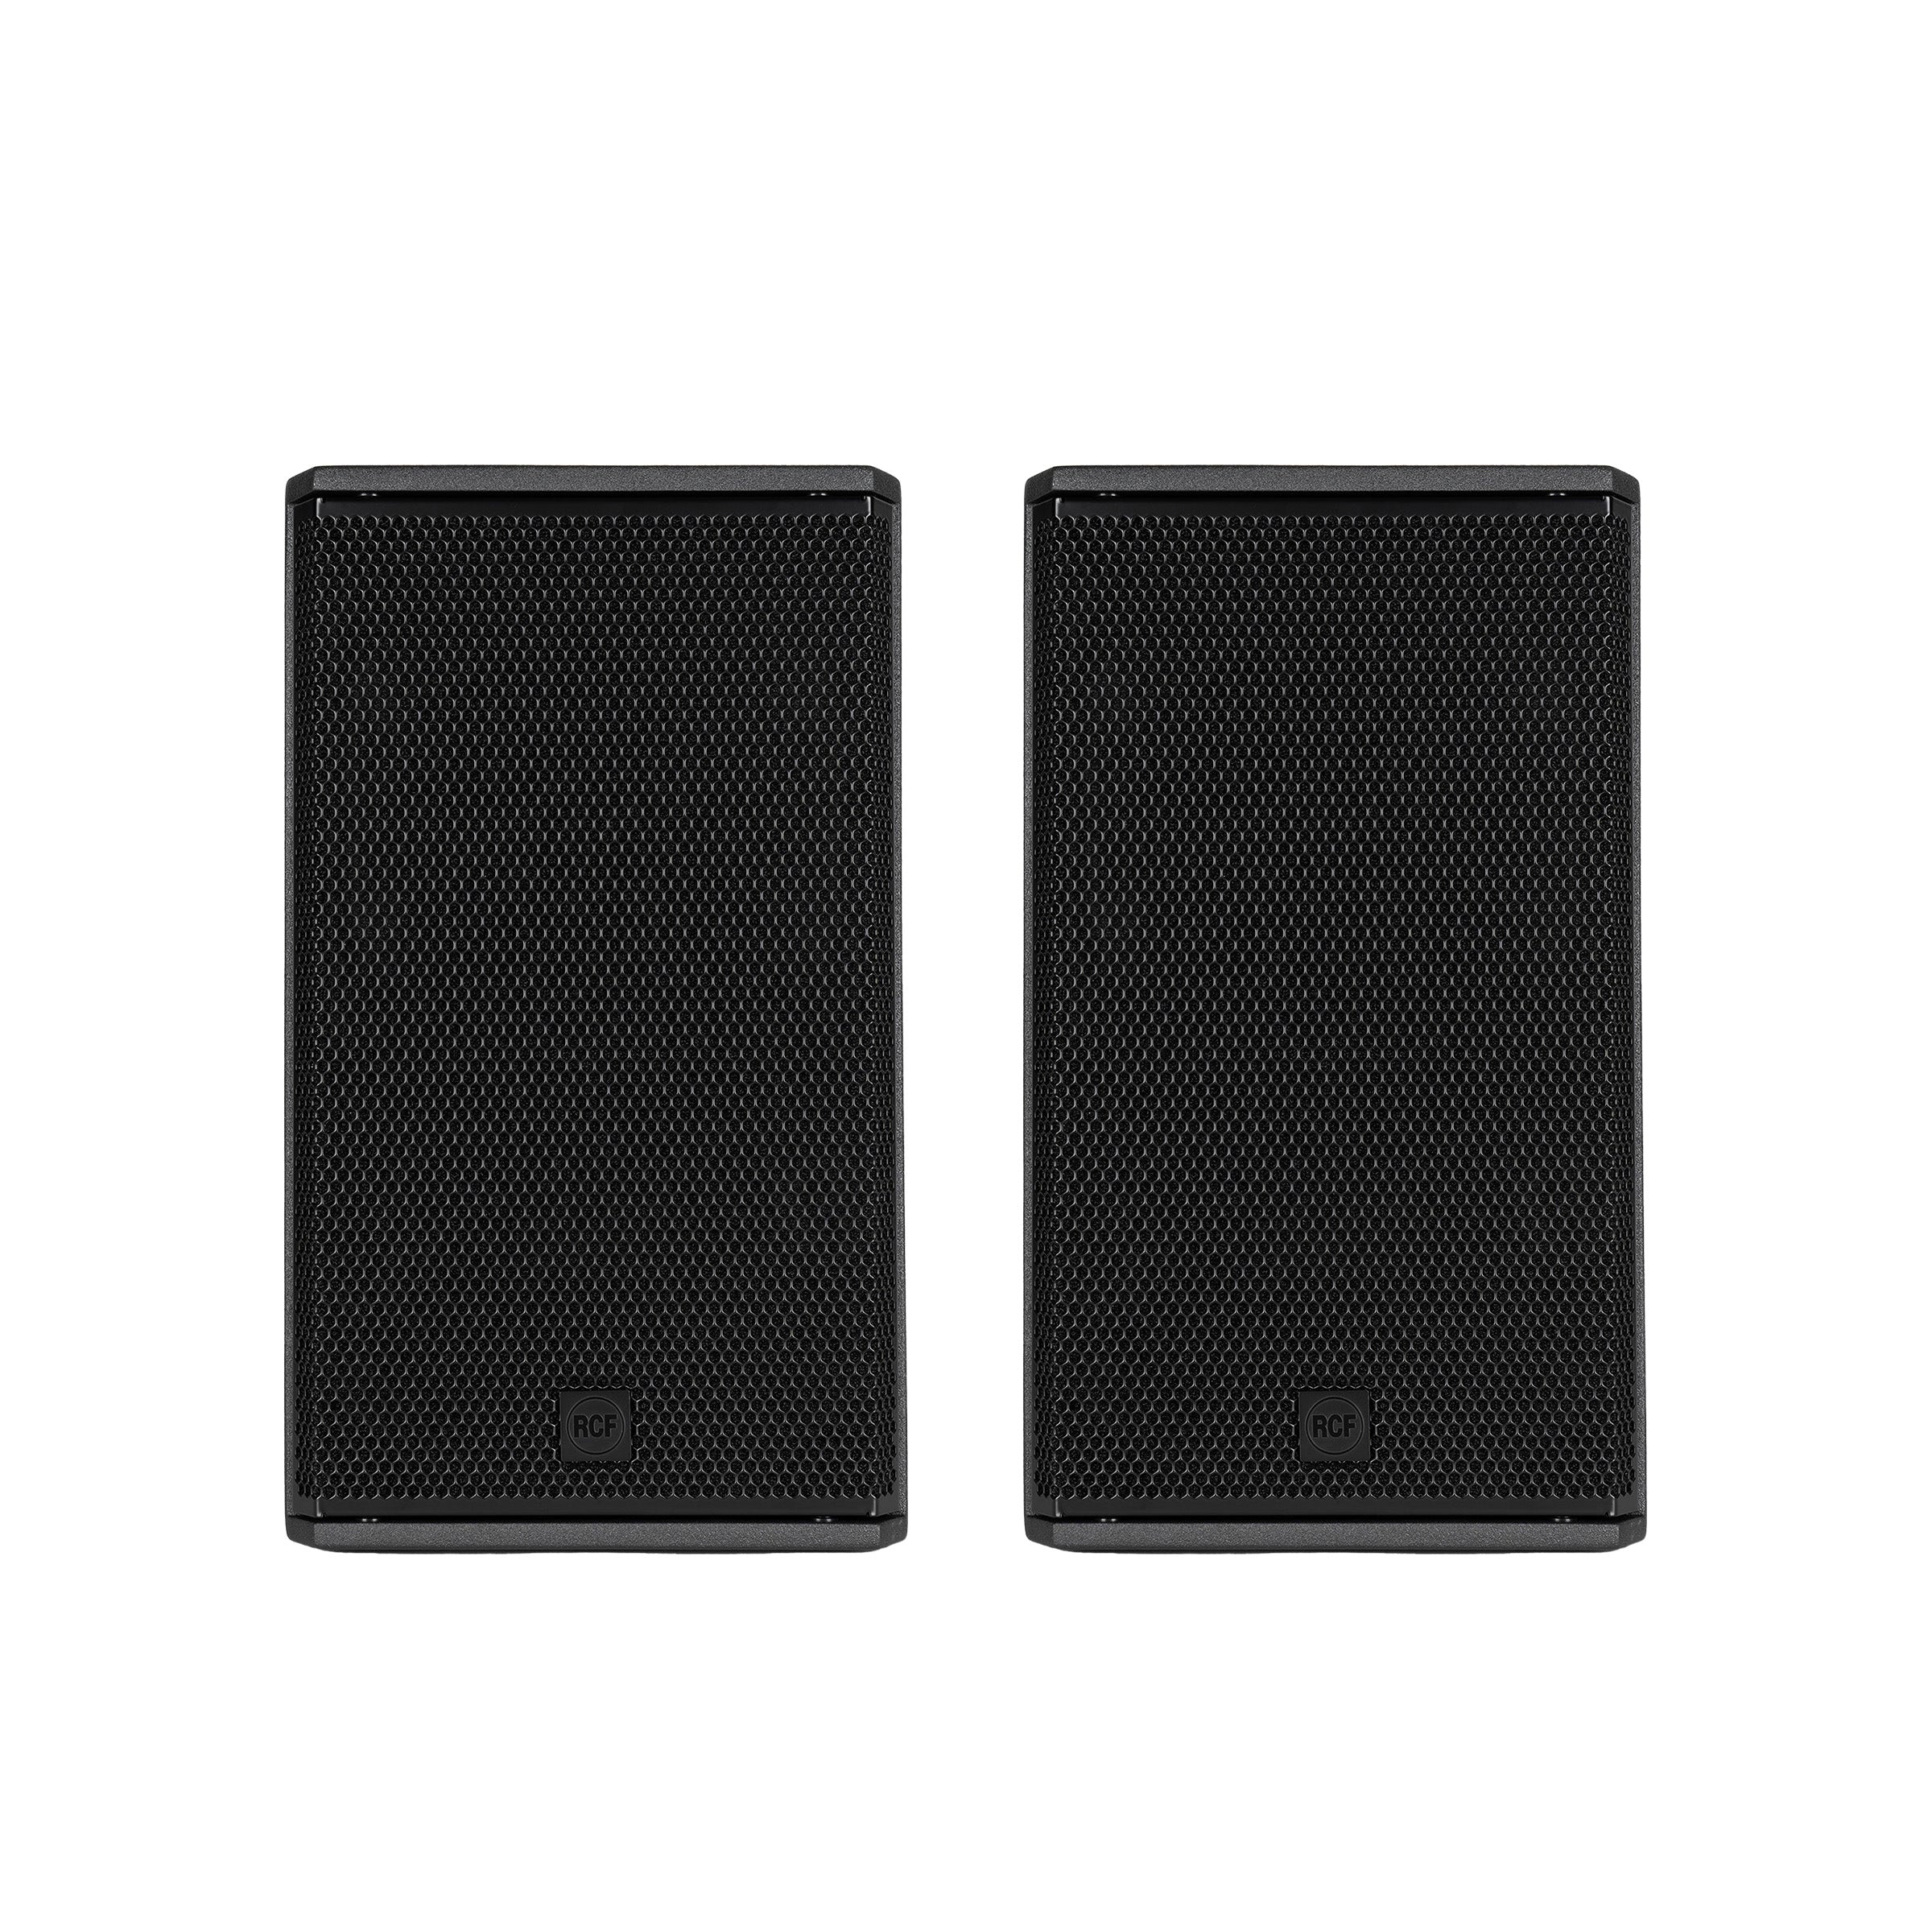 RCF NX 932-A Two-Way Active Speaker (Pair)